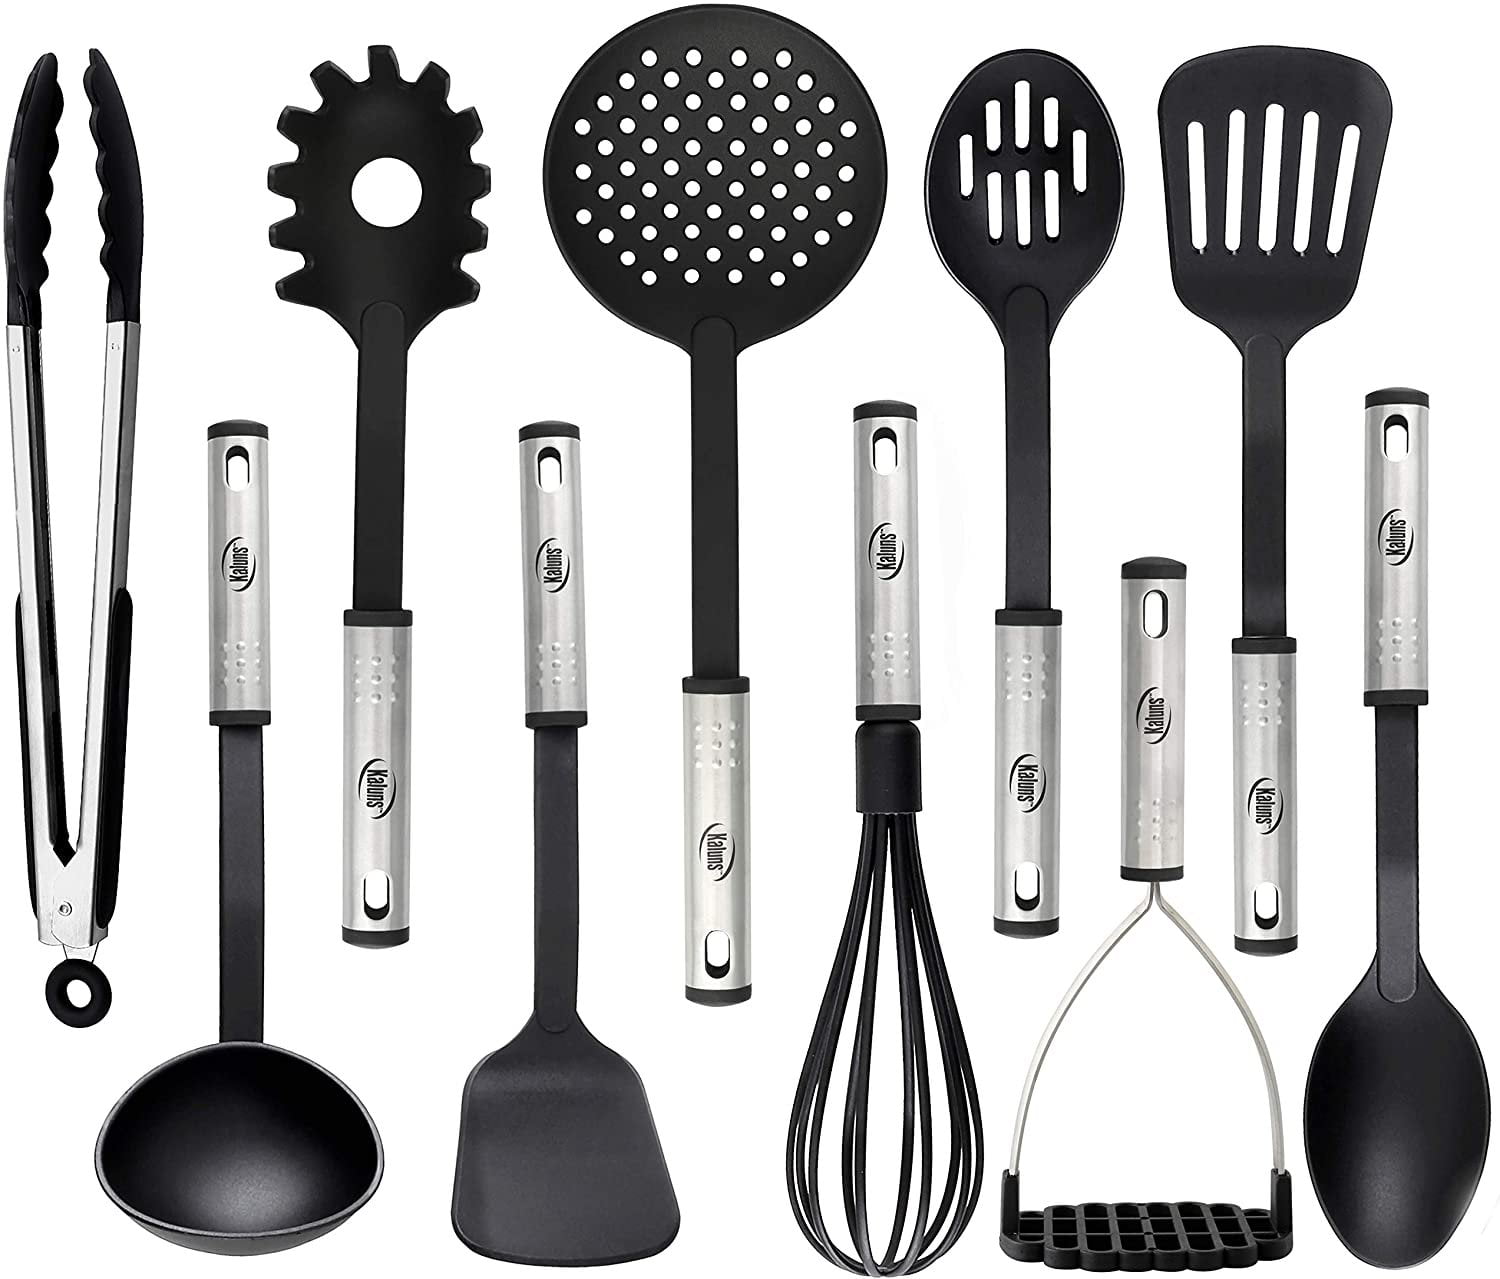 Bonus Silicone Spatula Best Non-stick Kaluns Kitchen Tongs Set Heat resistant Serving Utensils Tools Collection Best for Cooking and Baking 4 Piece -Green- Stainless steel 7-9-12 Inch Tong